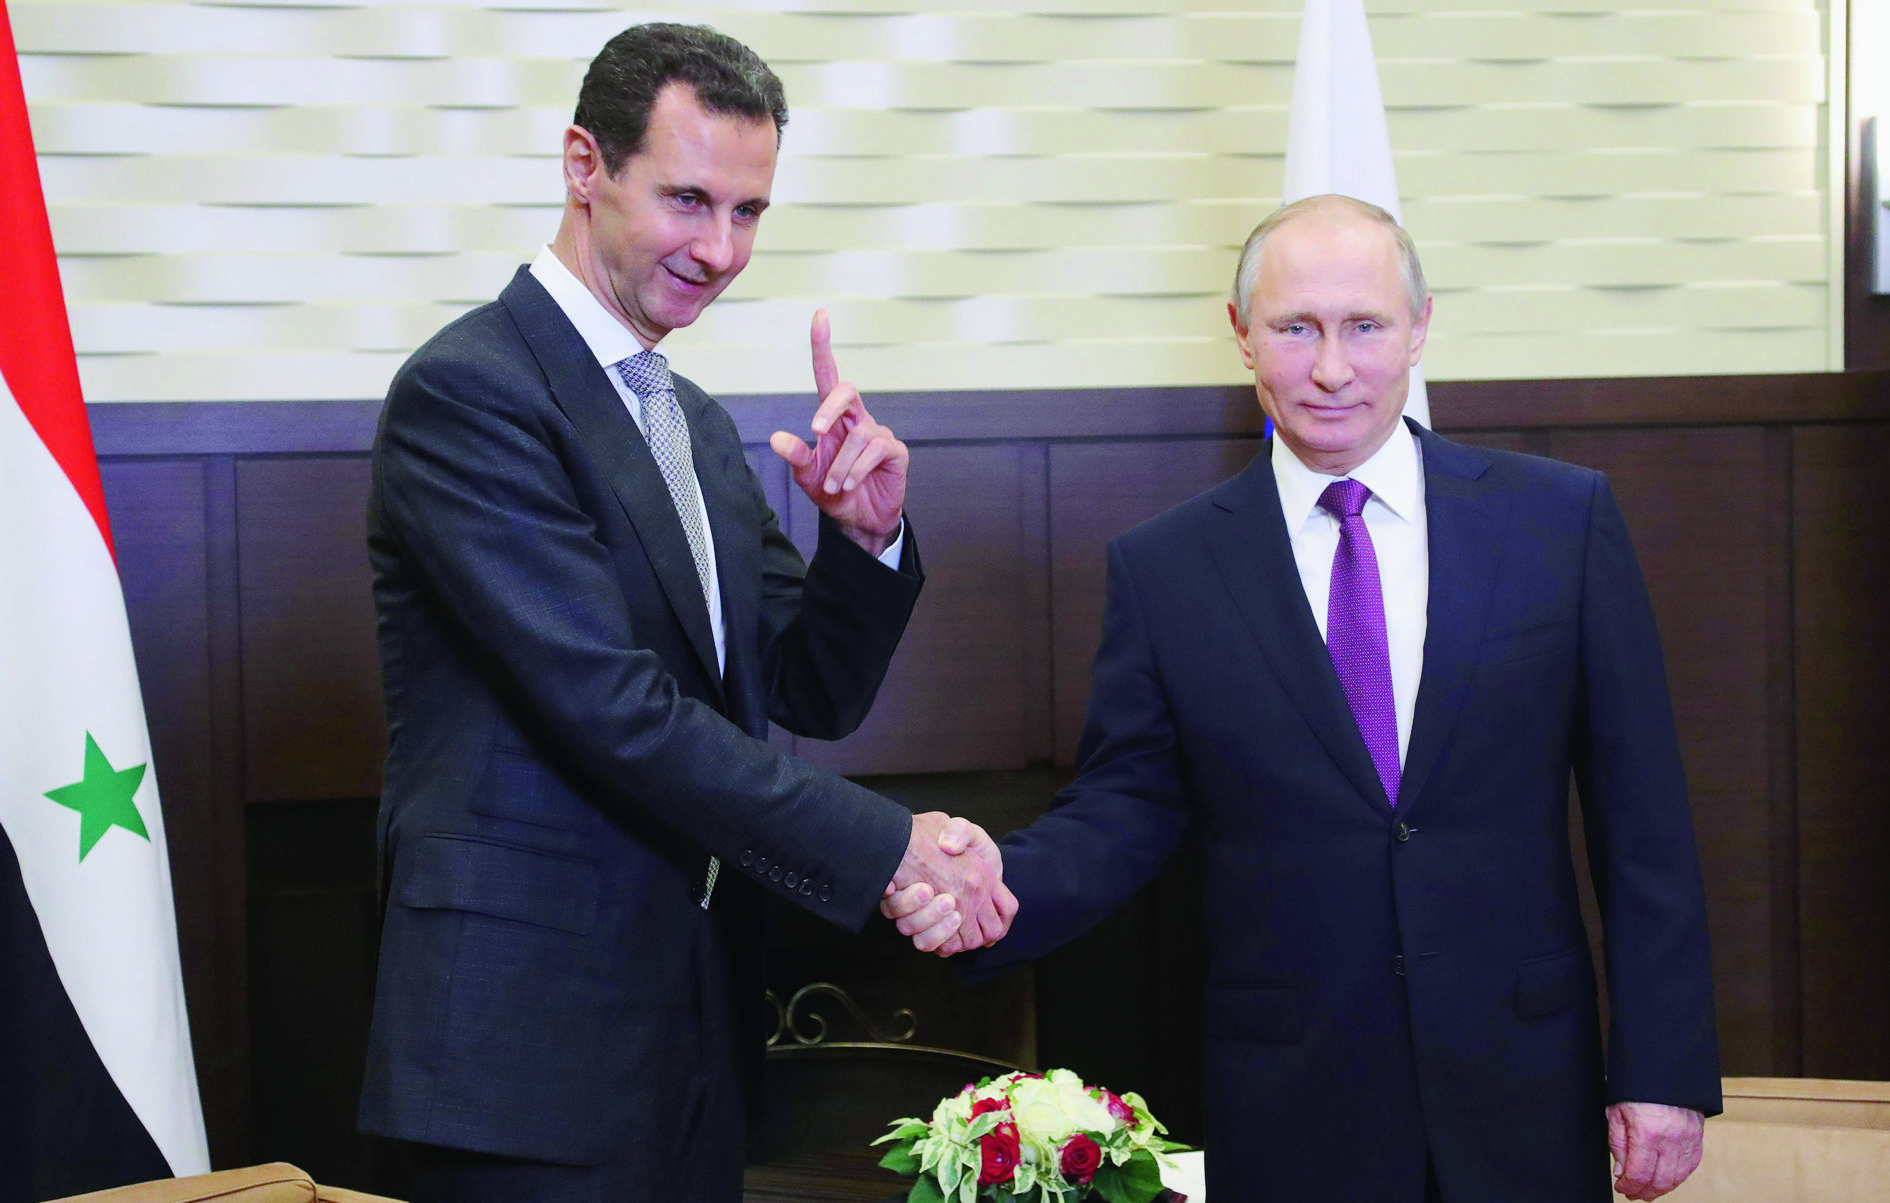 epa06341403 Russian President Vladimir Putin (R) shakes hands with Syrian President Bashar al-Assad (L) during their meeting in the Black sea resort of Sochi, Russia, 20 November 2017 (issued 21 November 2017). According to reports the two leaders met over talks focusing on the Syrian conflict.  EPA/MICHAEL KLIMENTYEV/SPUTNIK/KREMLIN / POOL MANDATORY CREDIT RUSSIA SYRIA DIPLOMACY